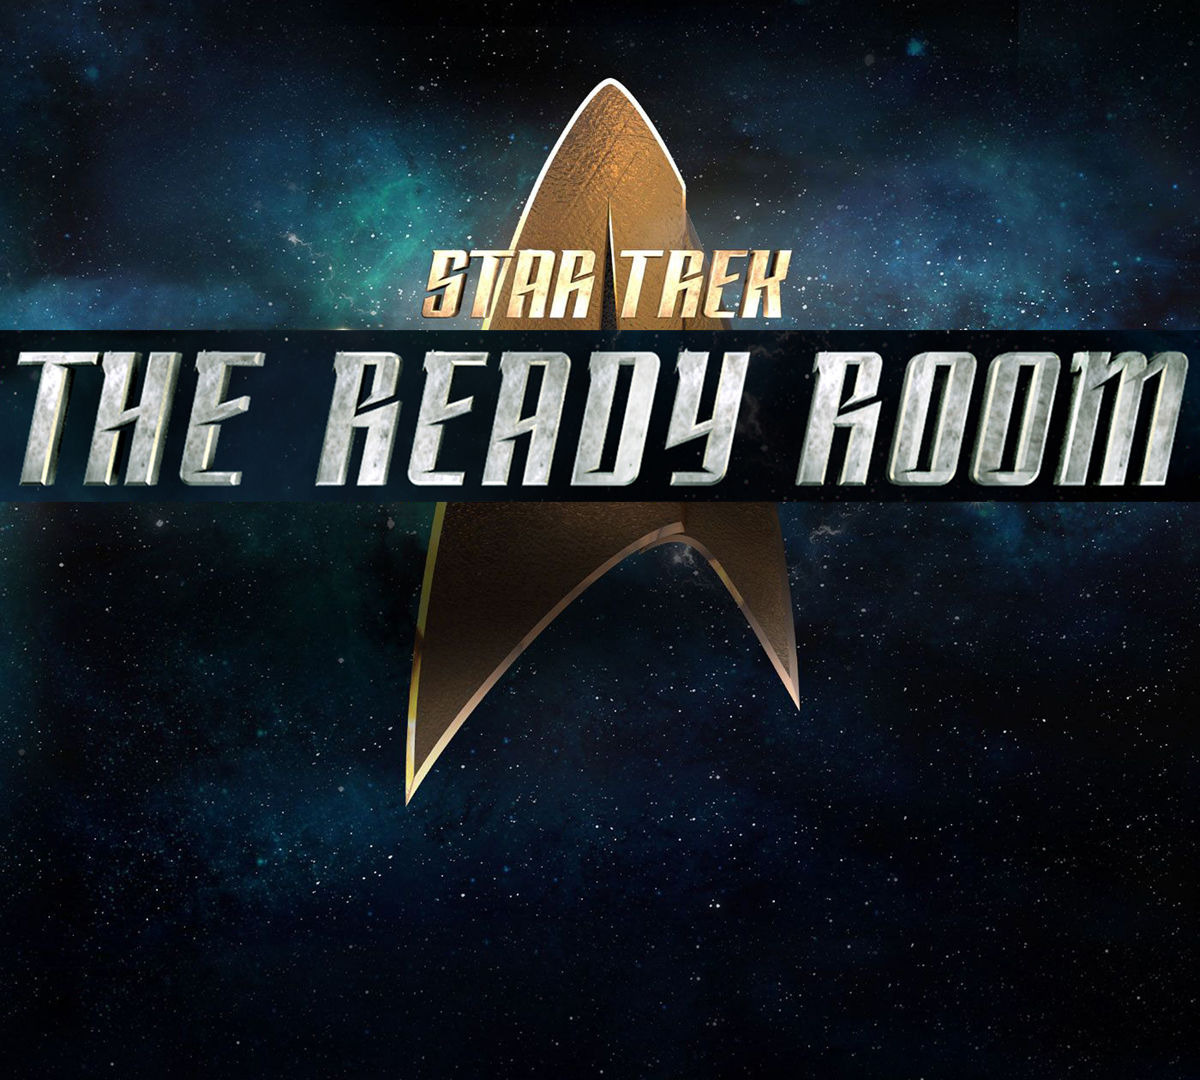 Show The Ready Room